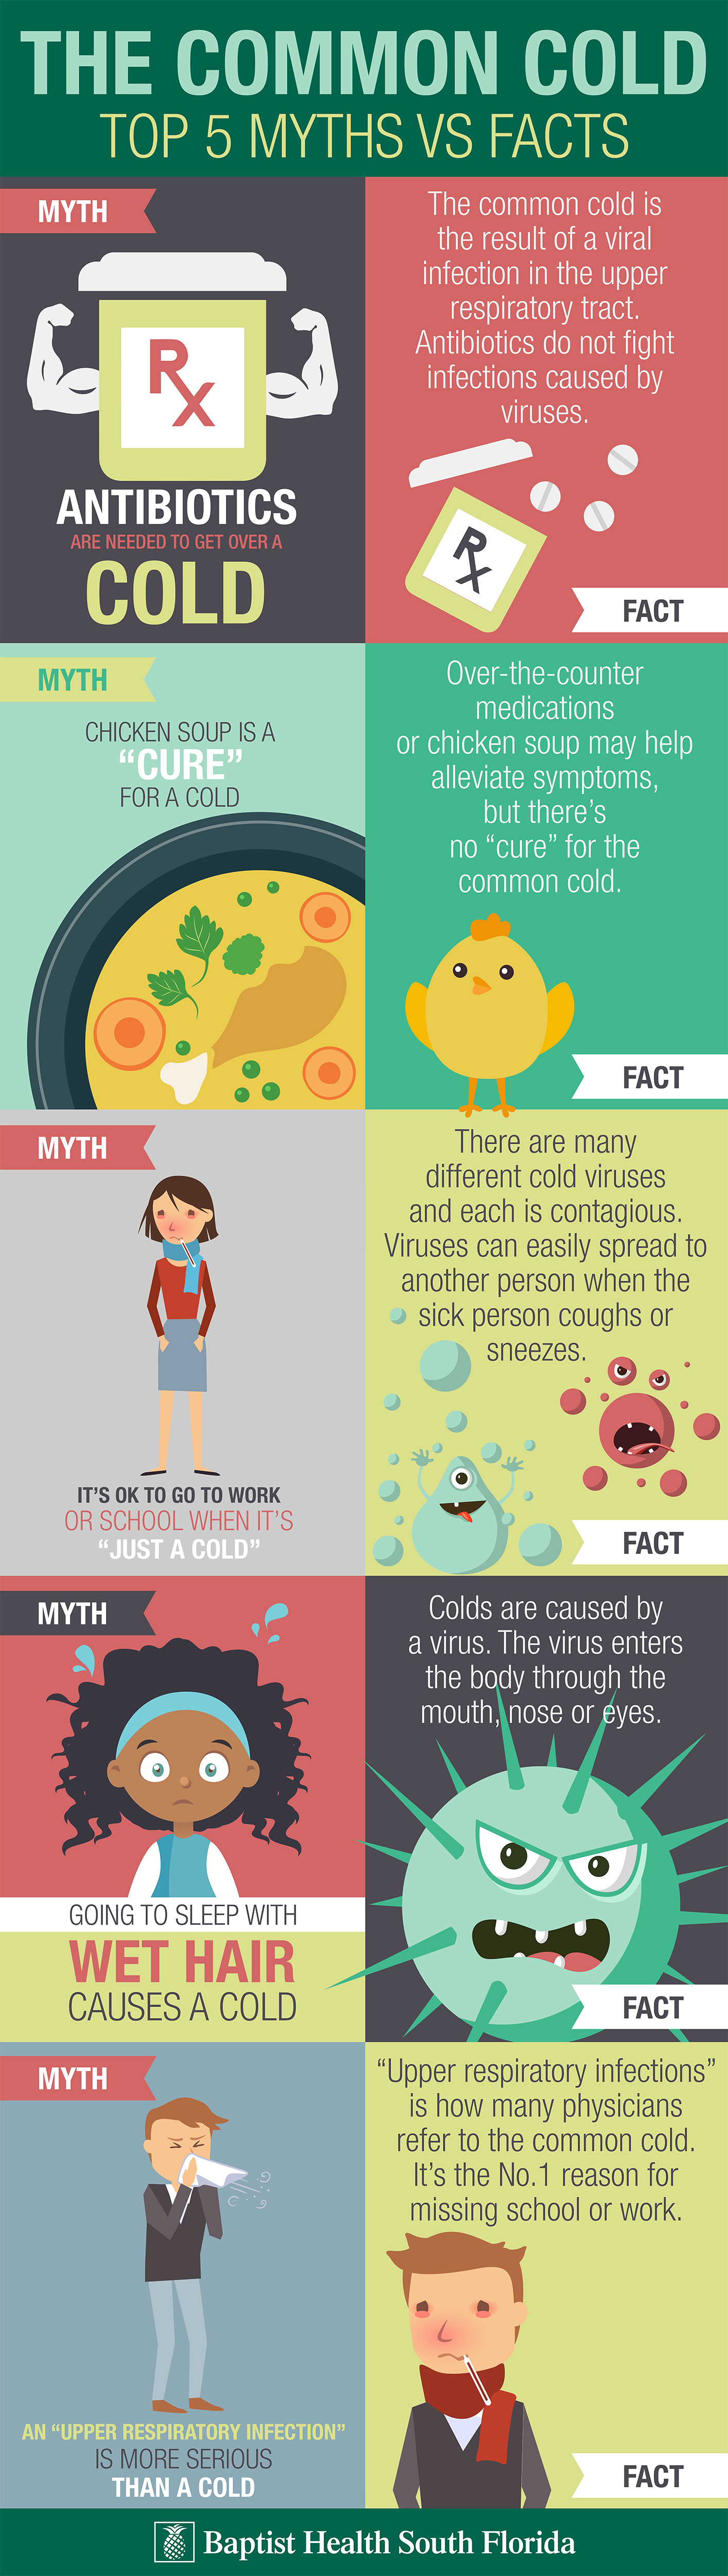 Common Cold Myth and Facts Infographic